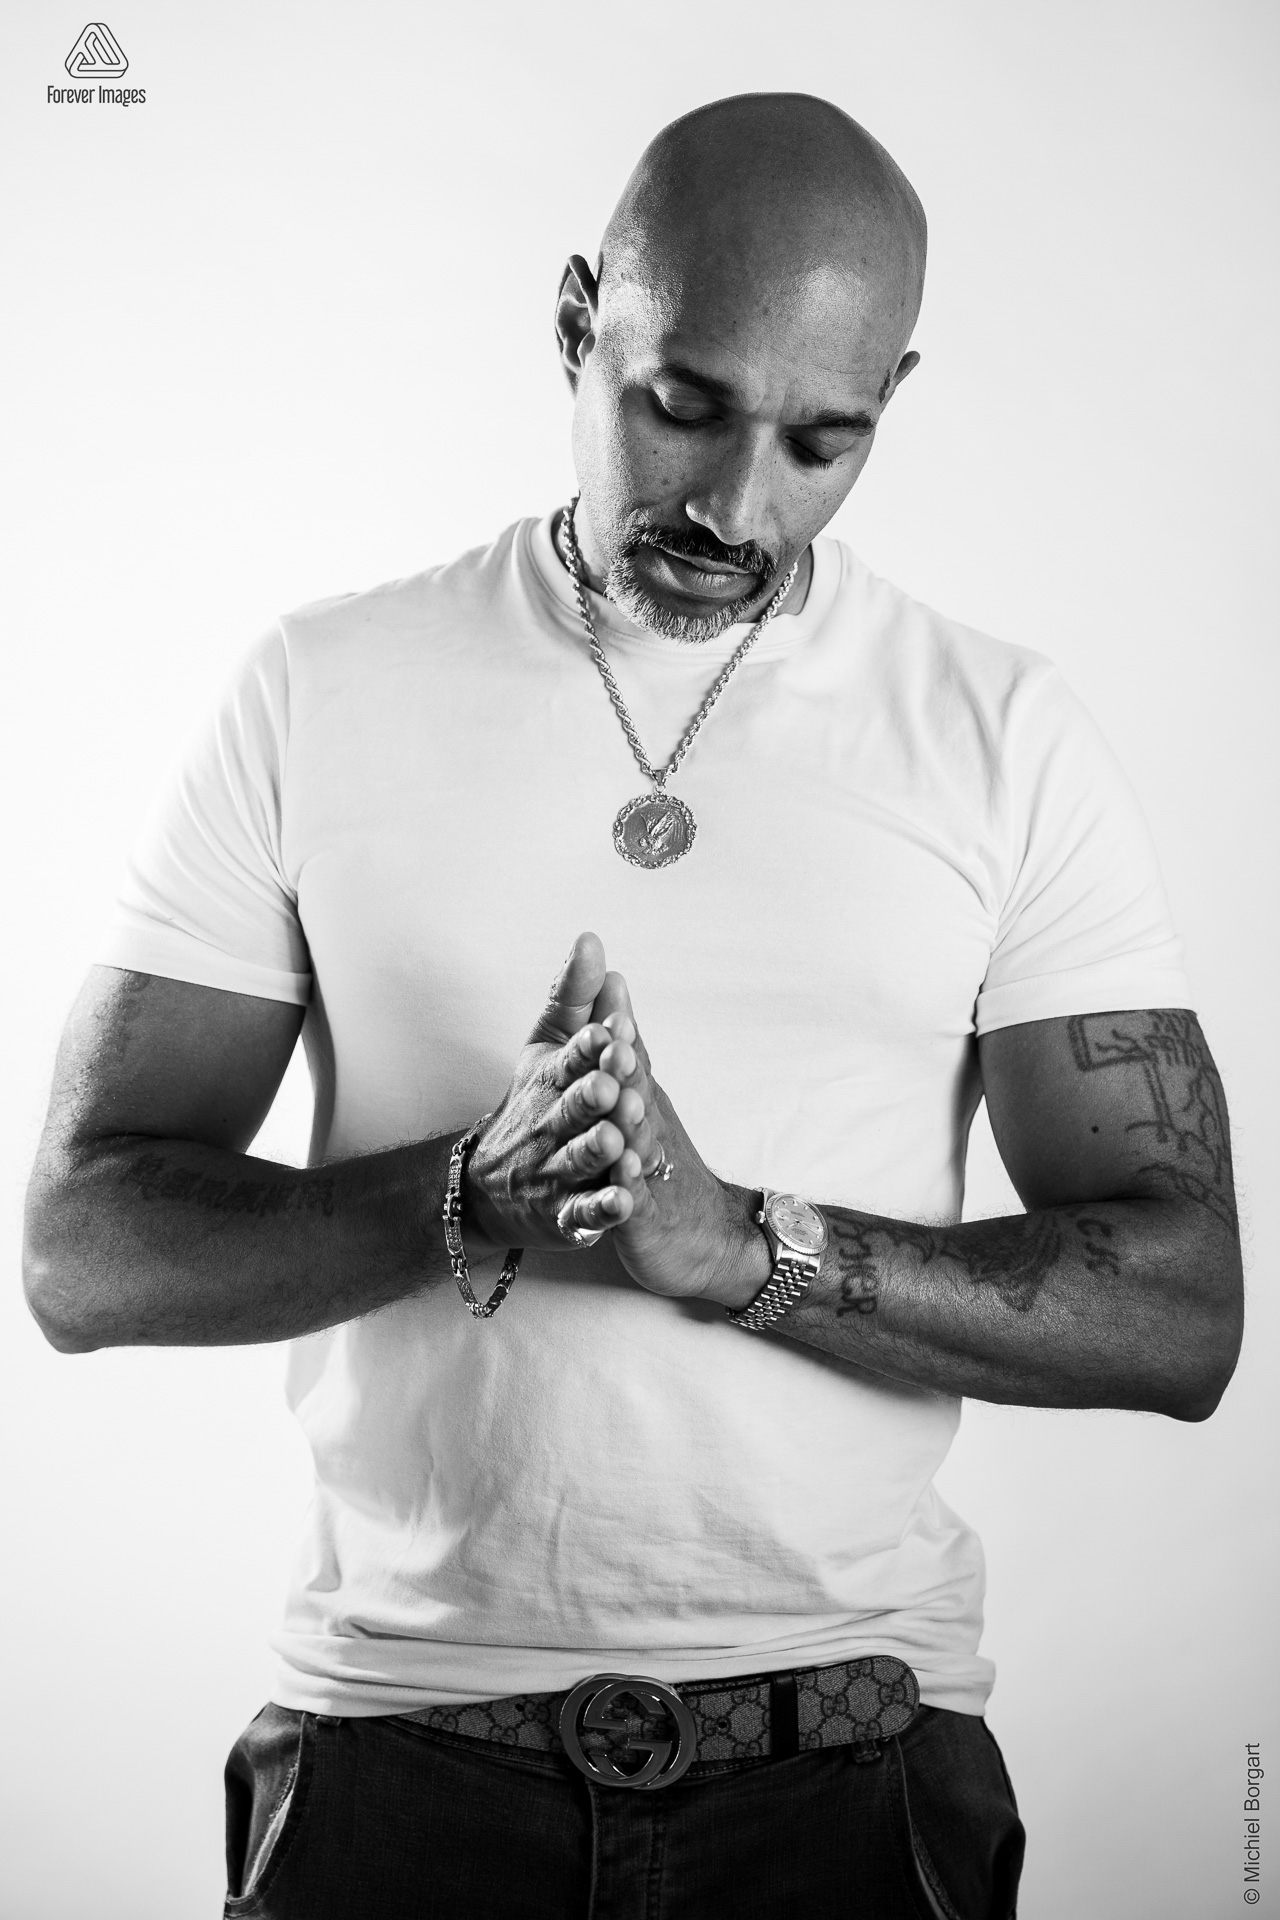 Portrait photo black and white B&W man with tattoo in white t-shirt hands together | Marchall Breidel | Portrait Photographer Michiel Borgart - Forever Images.